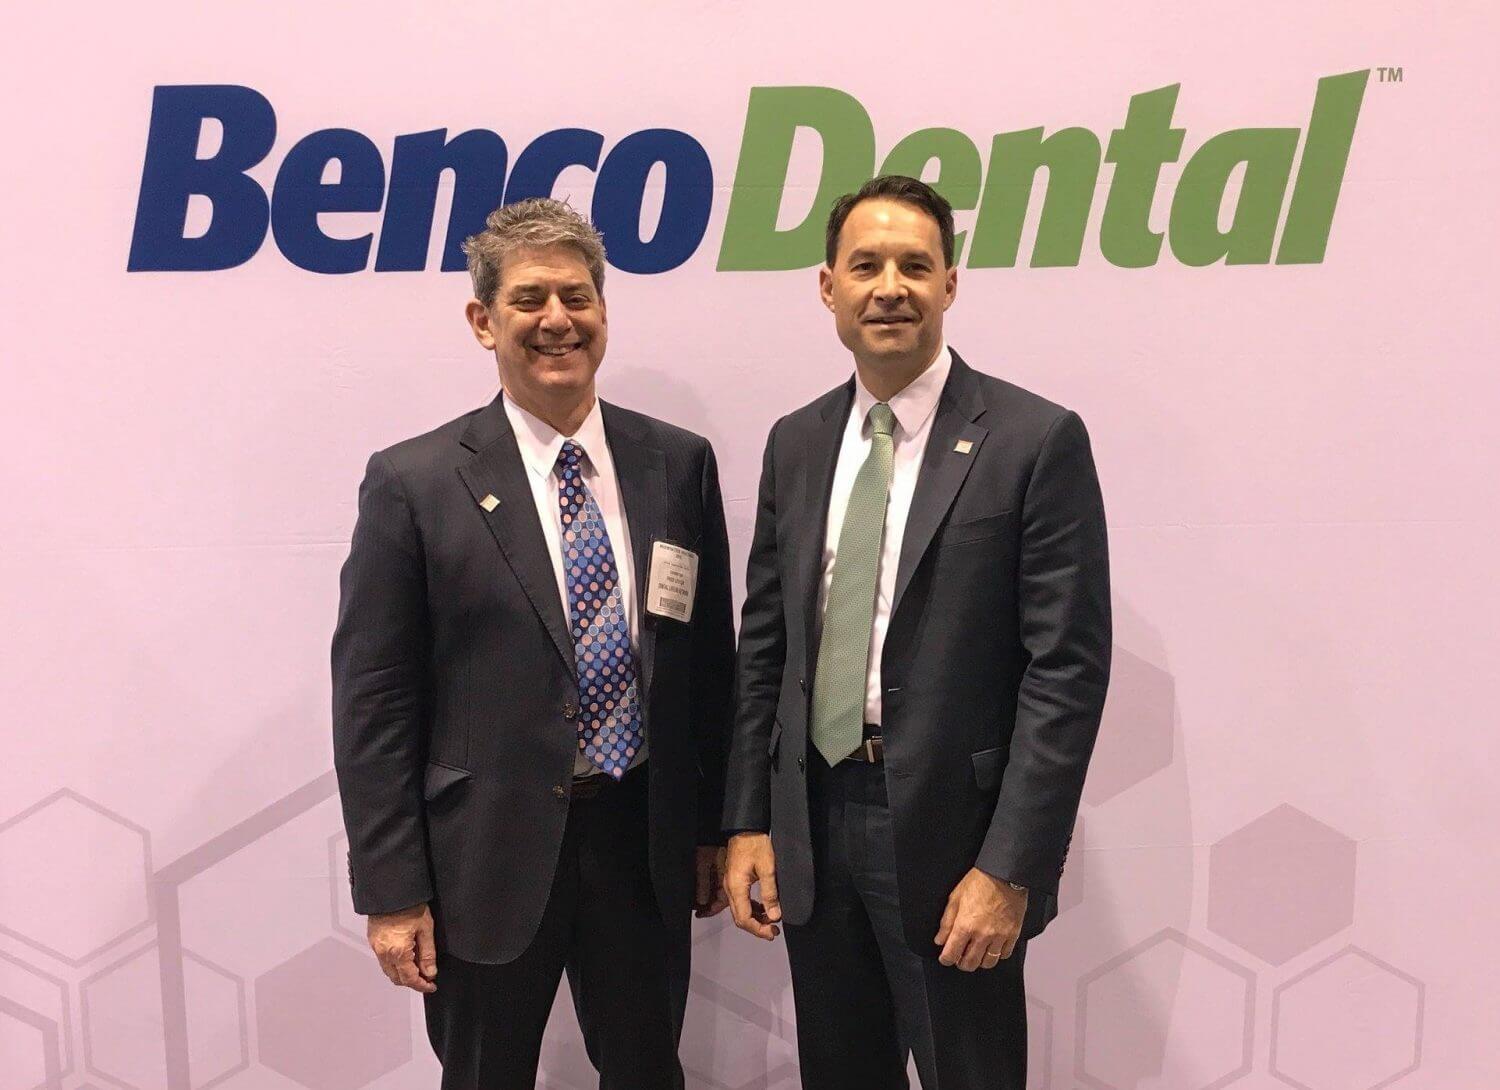 Recognizing Benco Dental’s Continued Support